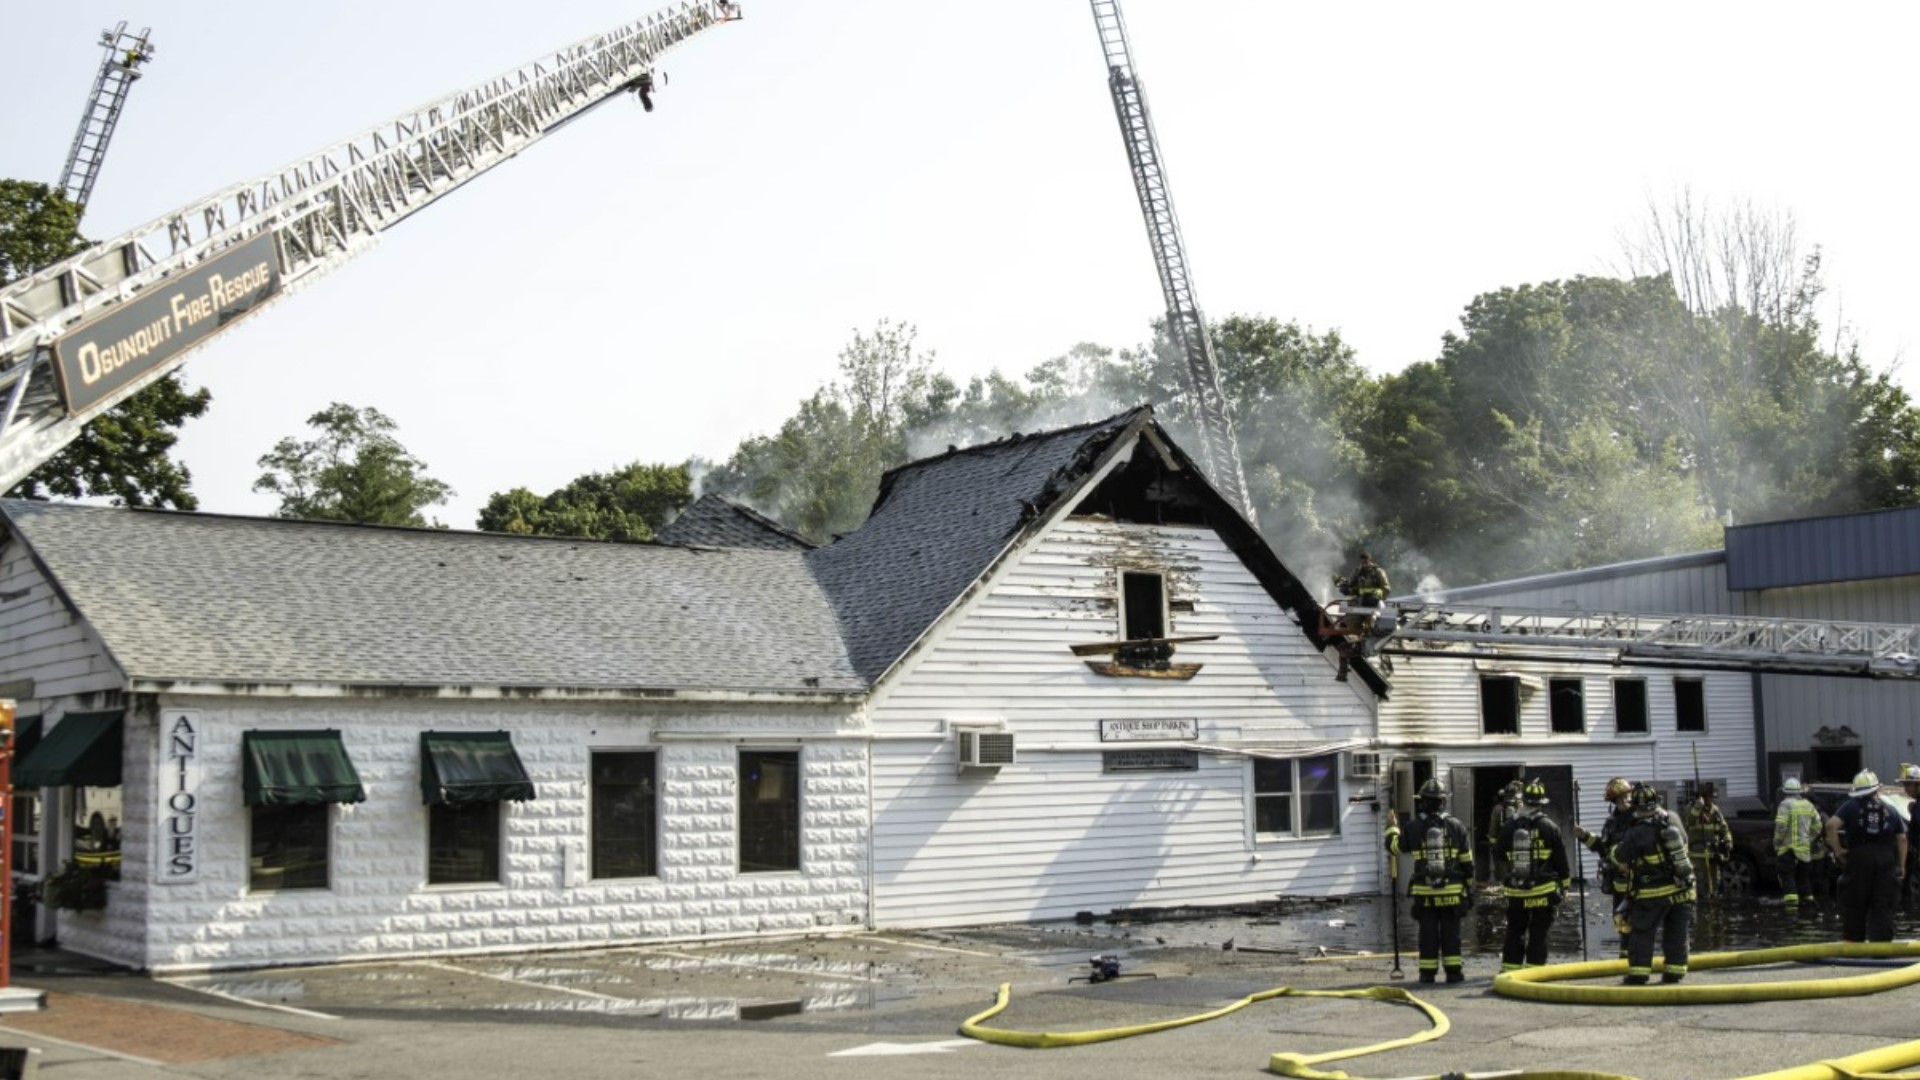 When firefighters arrived around 7:58 a.m., the building at 166 Main St. was engulfed in flames with heavy smoke.